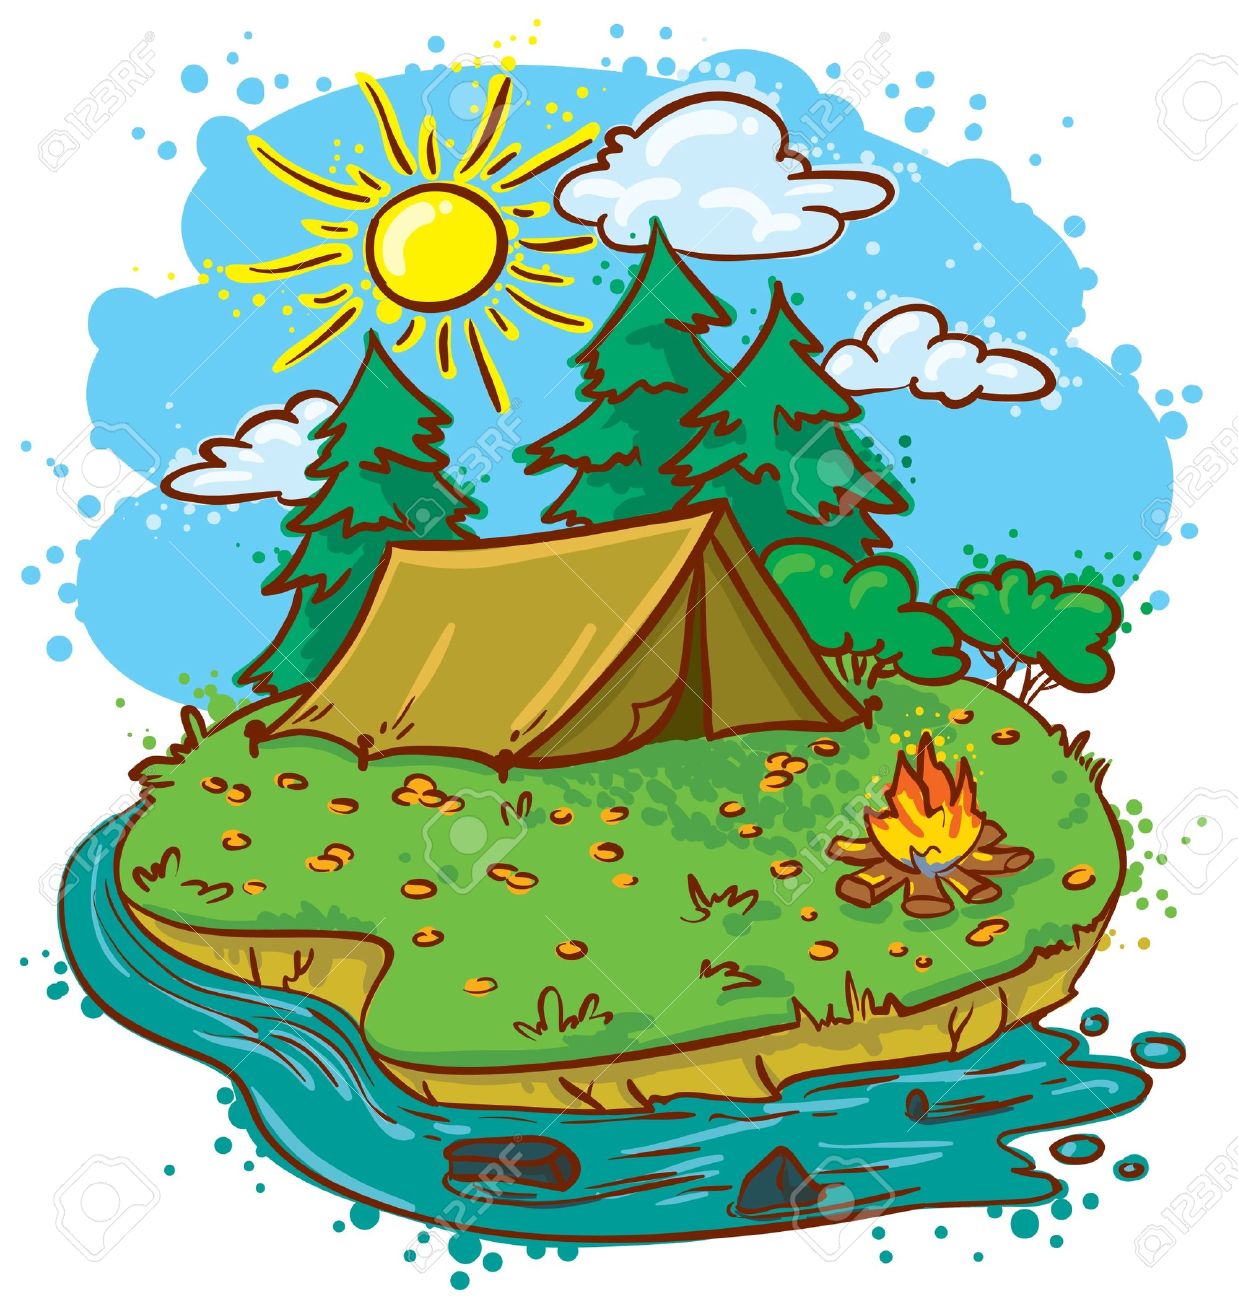 camping clipart. Size: 64 Kb